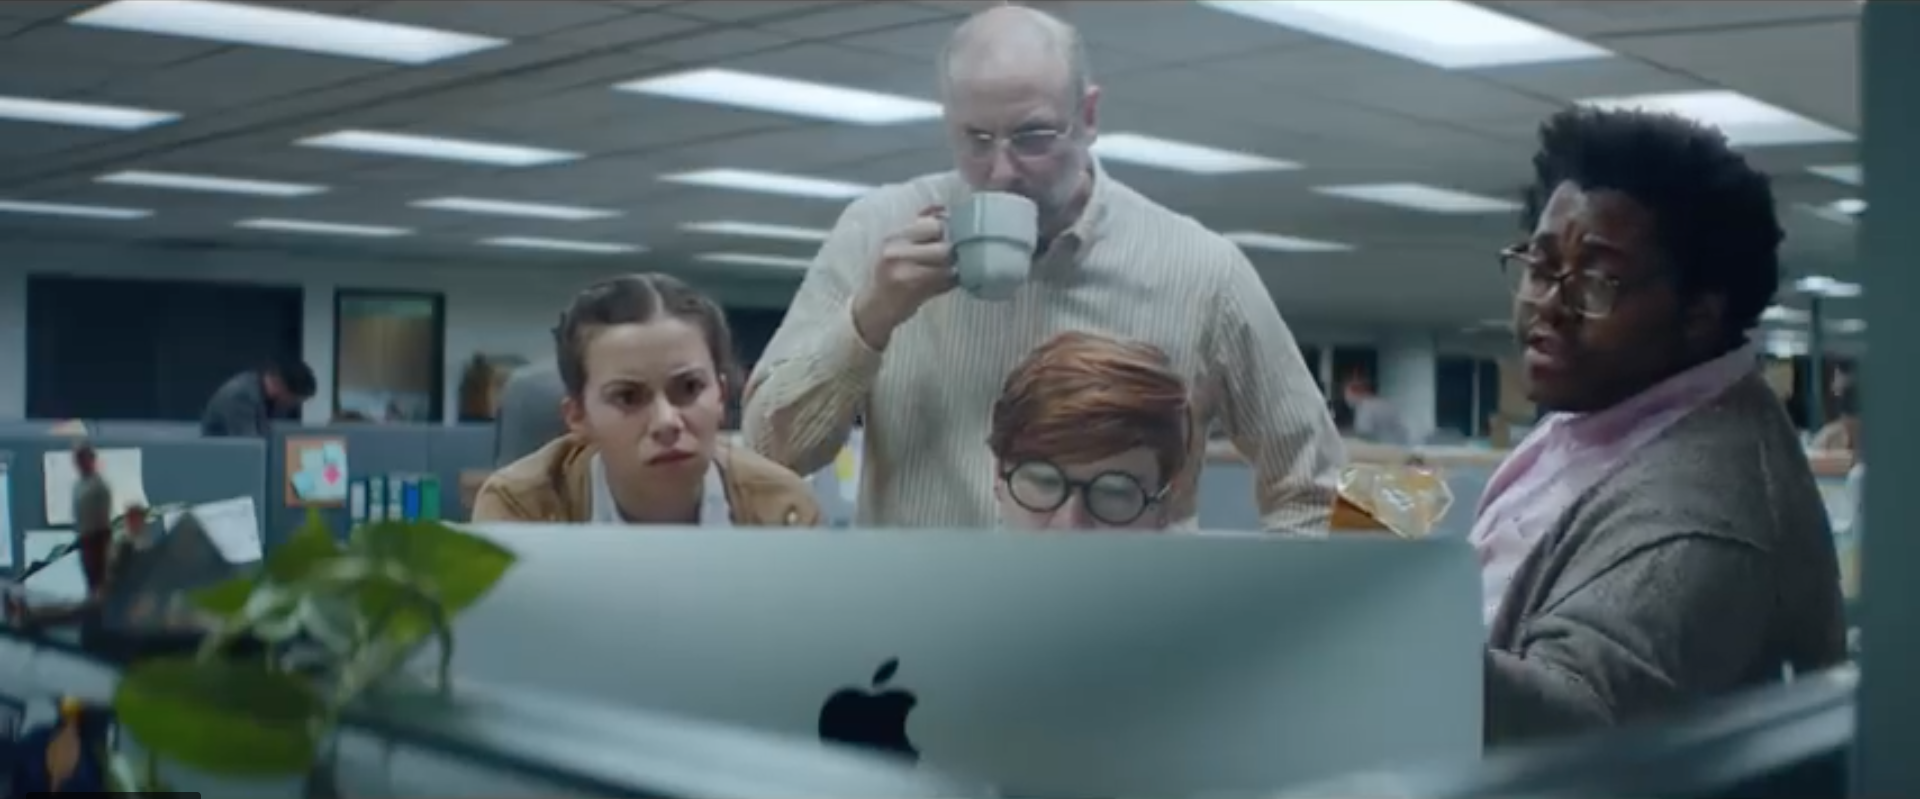 Apple Simulates Creation of Its New Commercial Patented Pizza Box